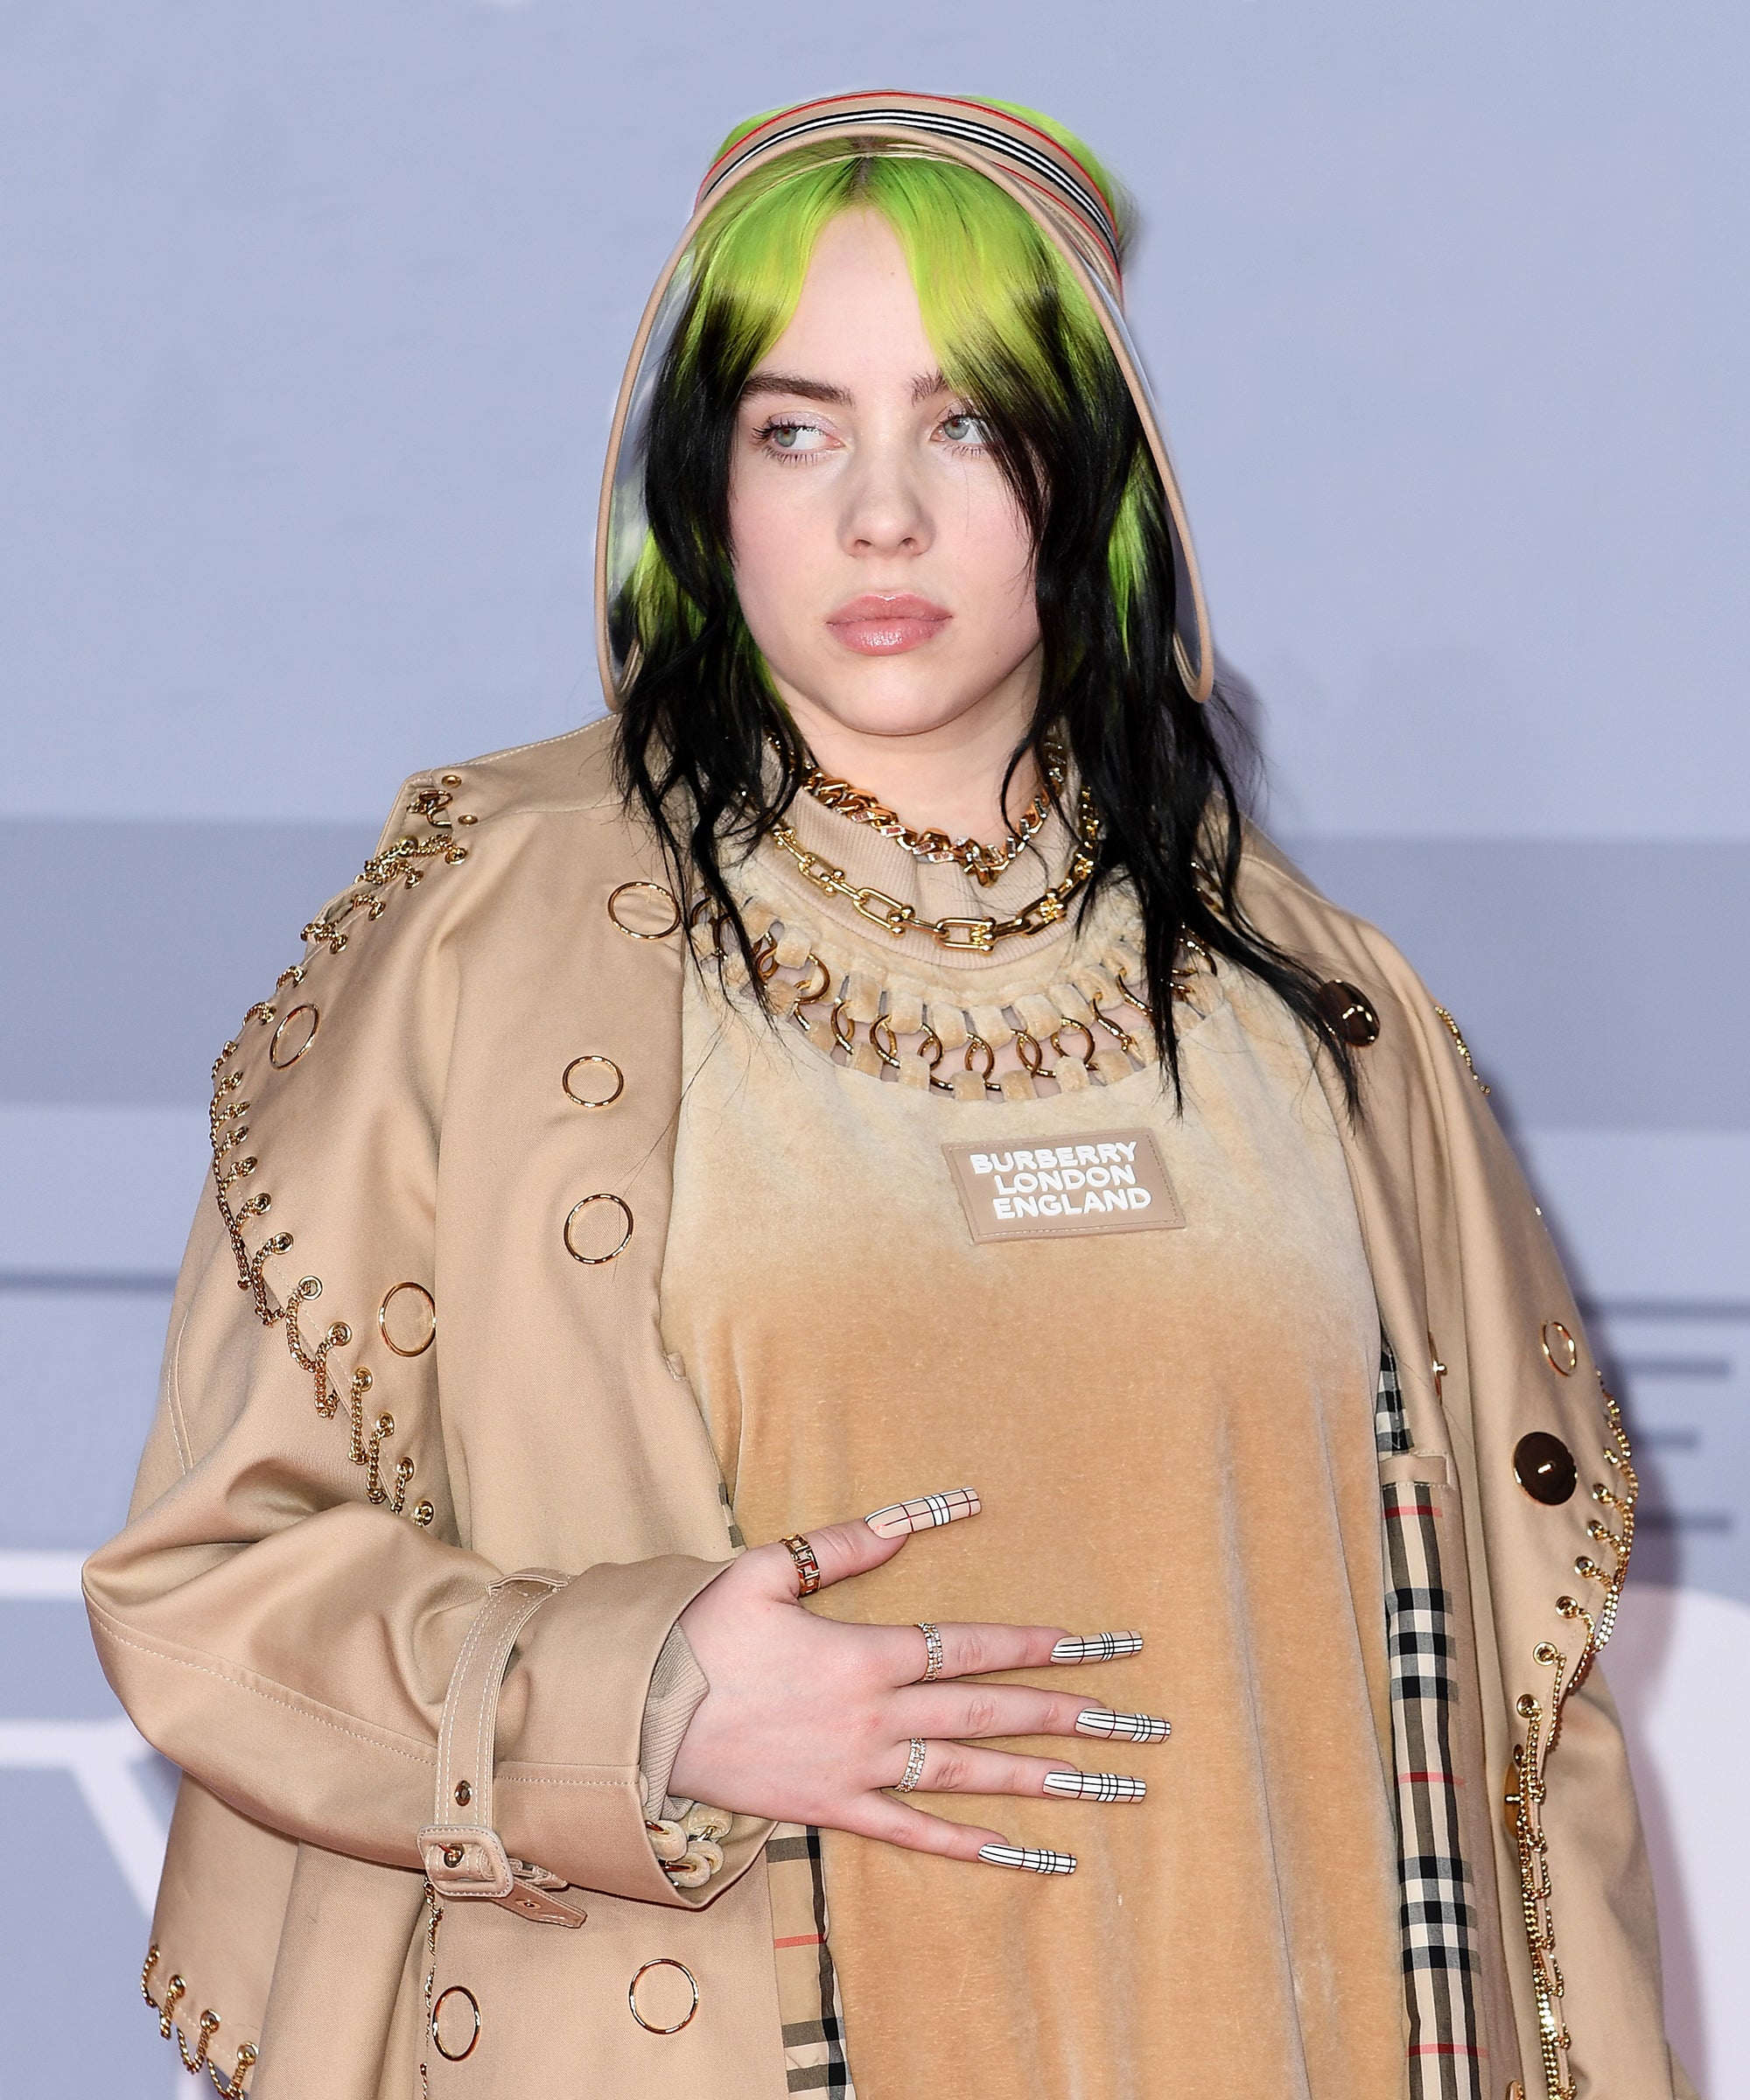 Billie Eilish Shared Her Best Looks on Instagram and We're